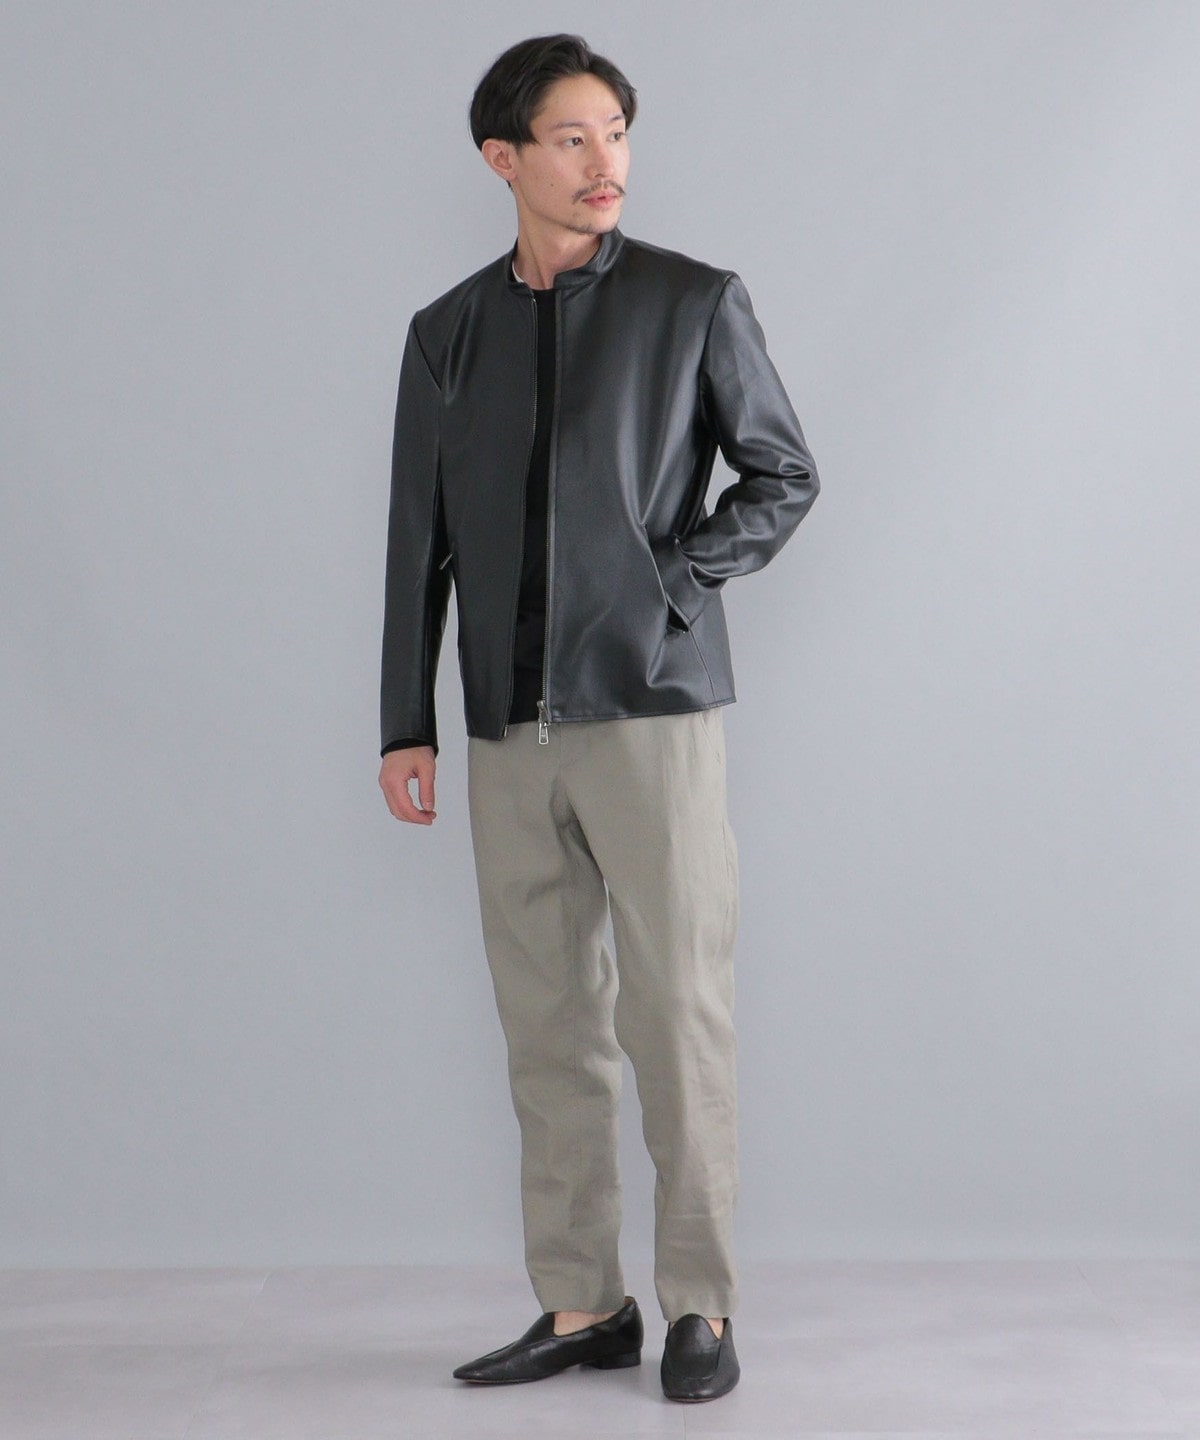 SHIPS: Synthetic Leather シングルライダース ジャケット 22SS 